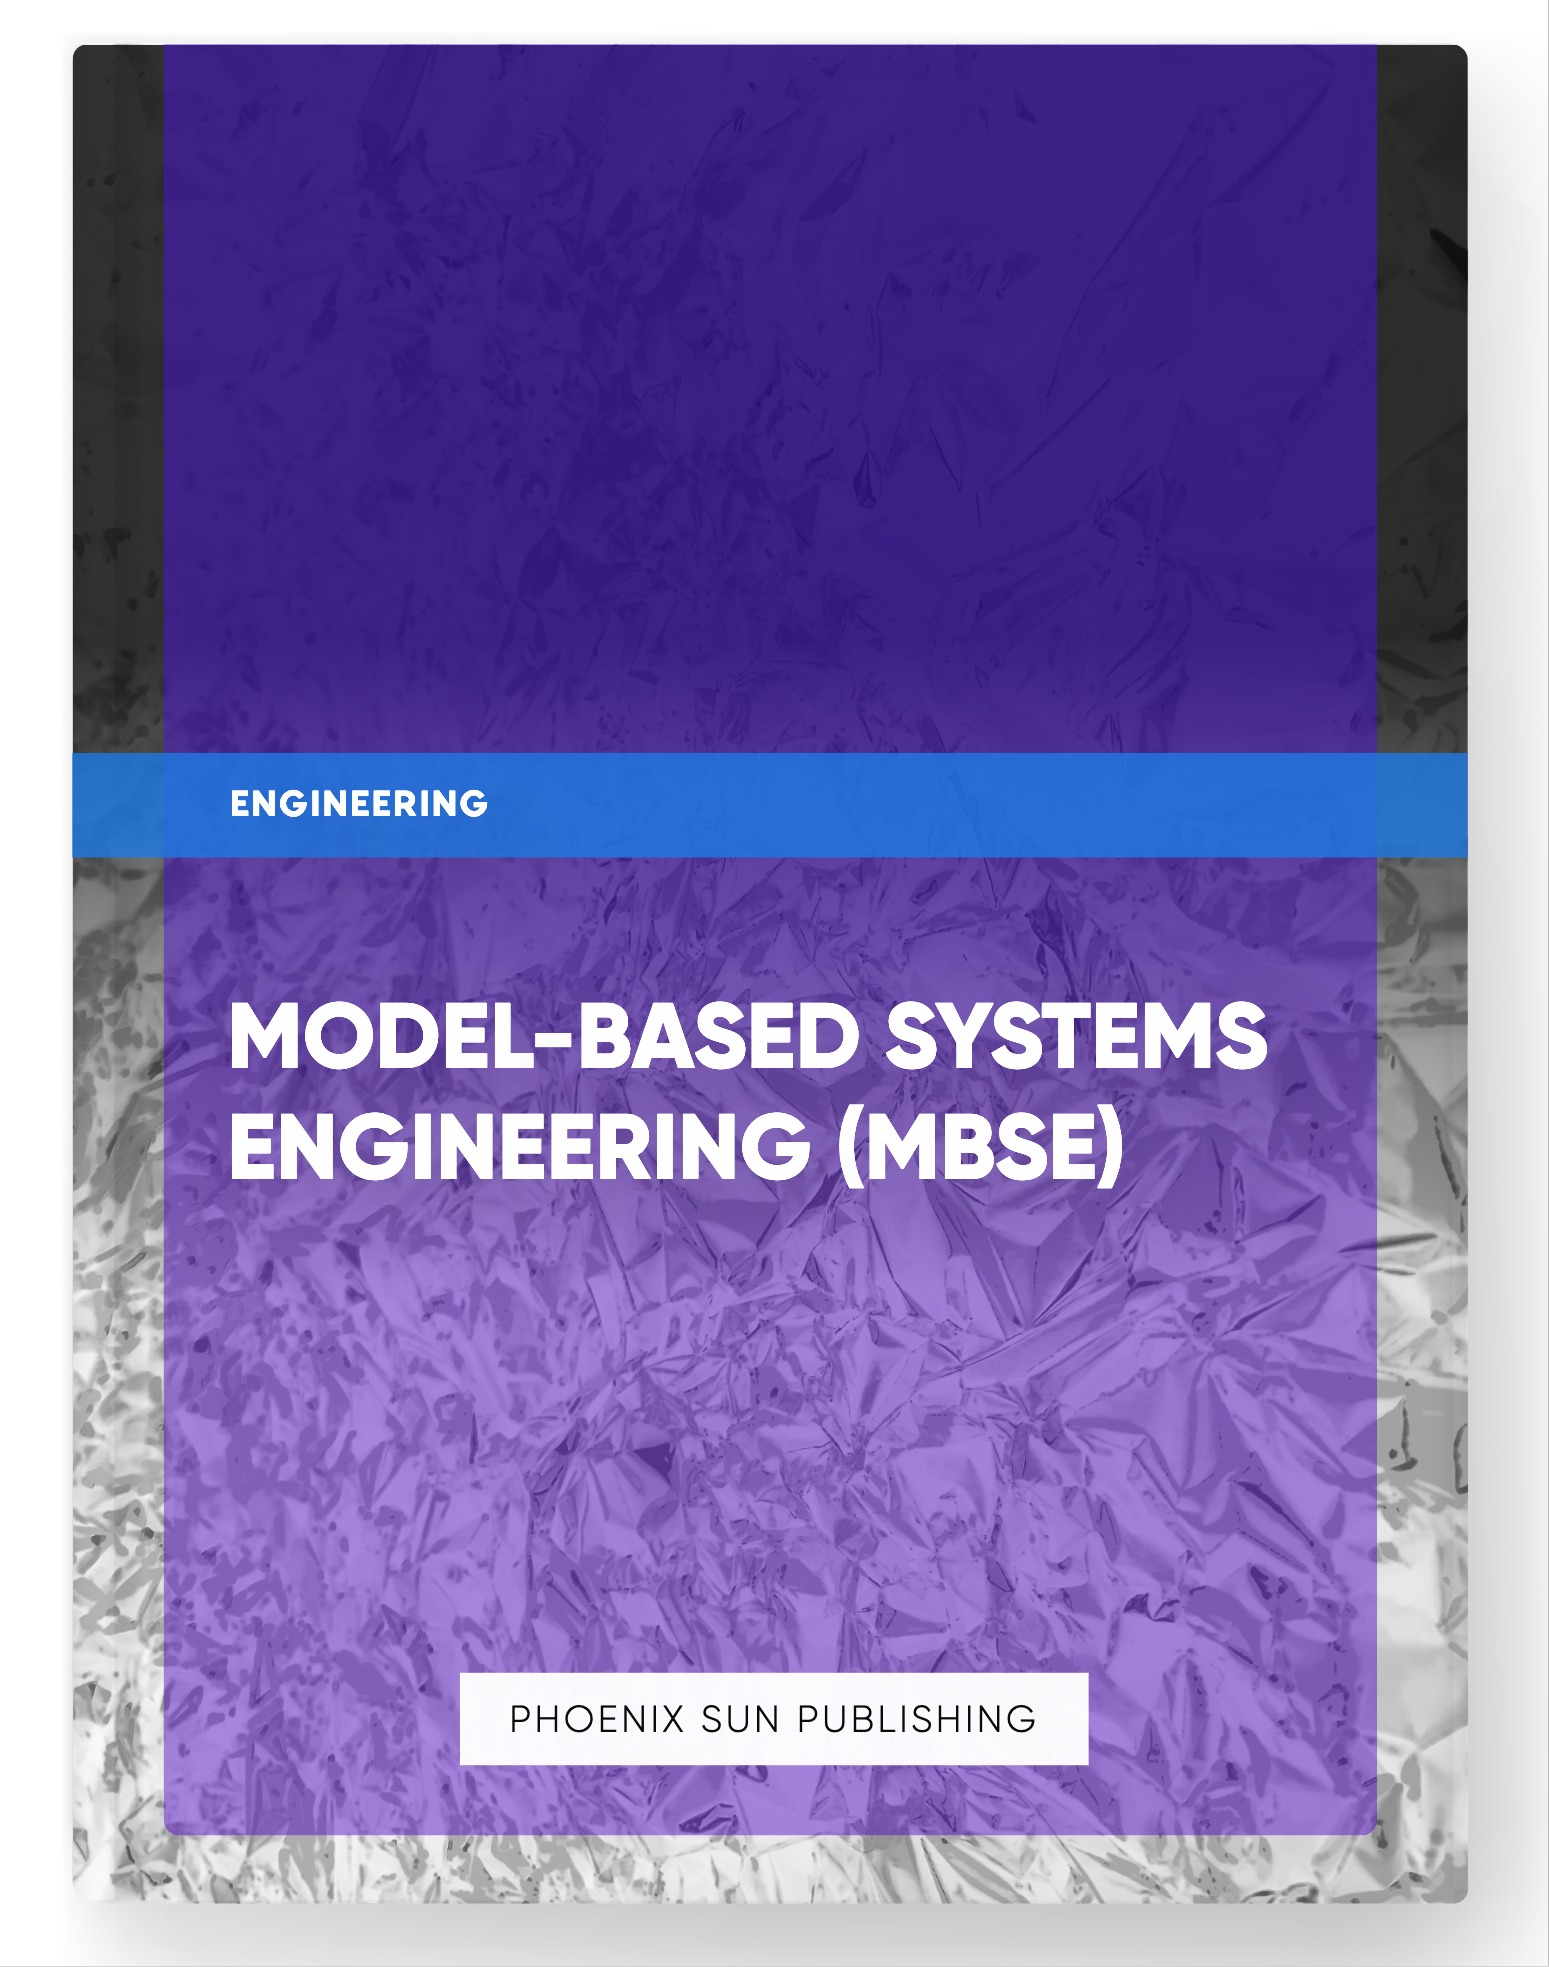 Model-Based Systems Engineering (MBSE)